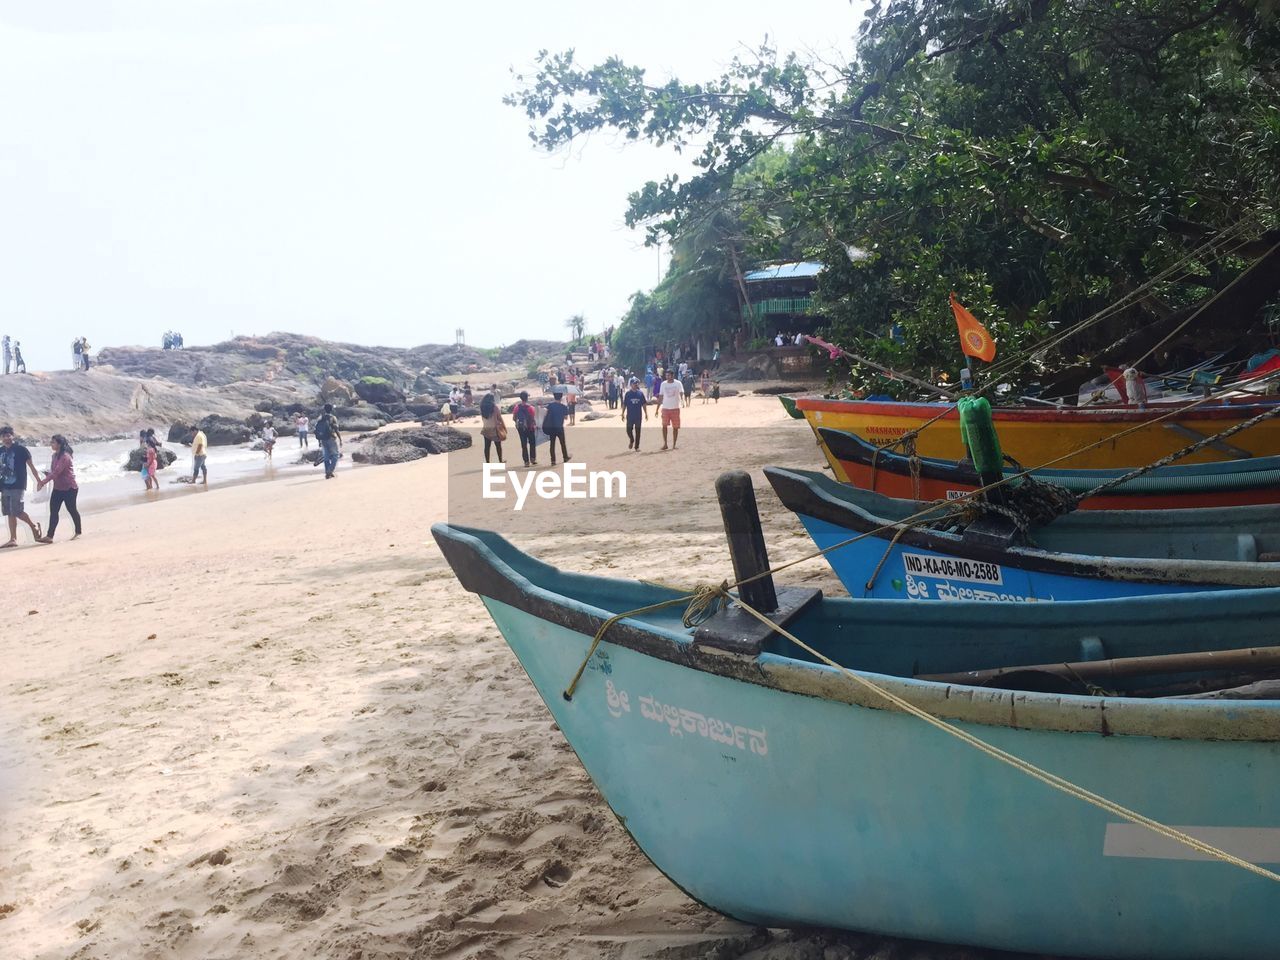 PANORAMIC VIEW OF PEOPLE ON BEACH